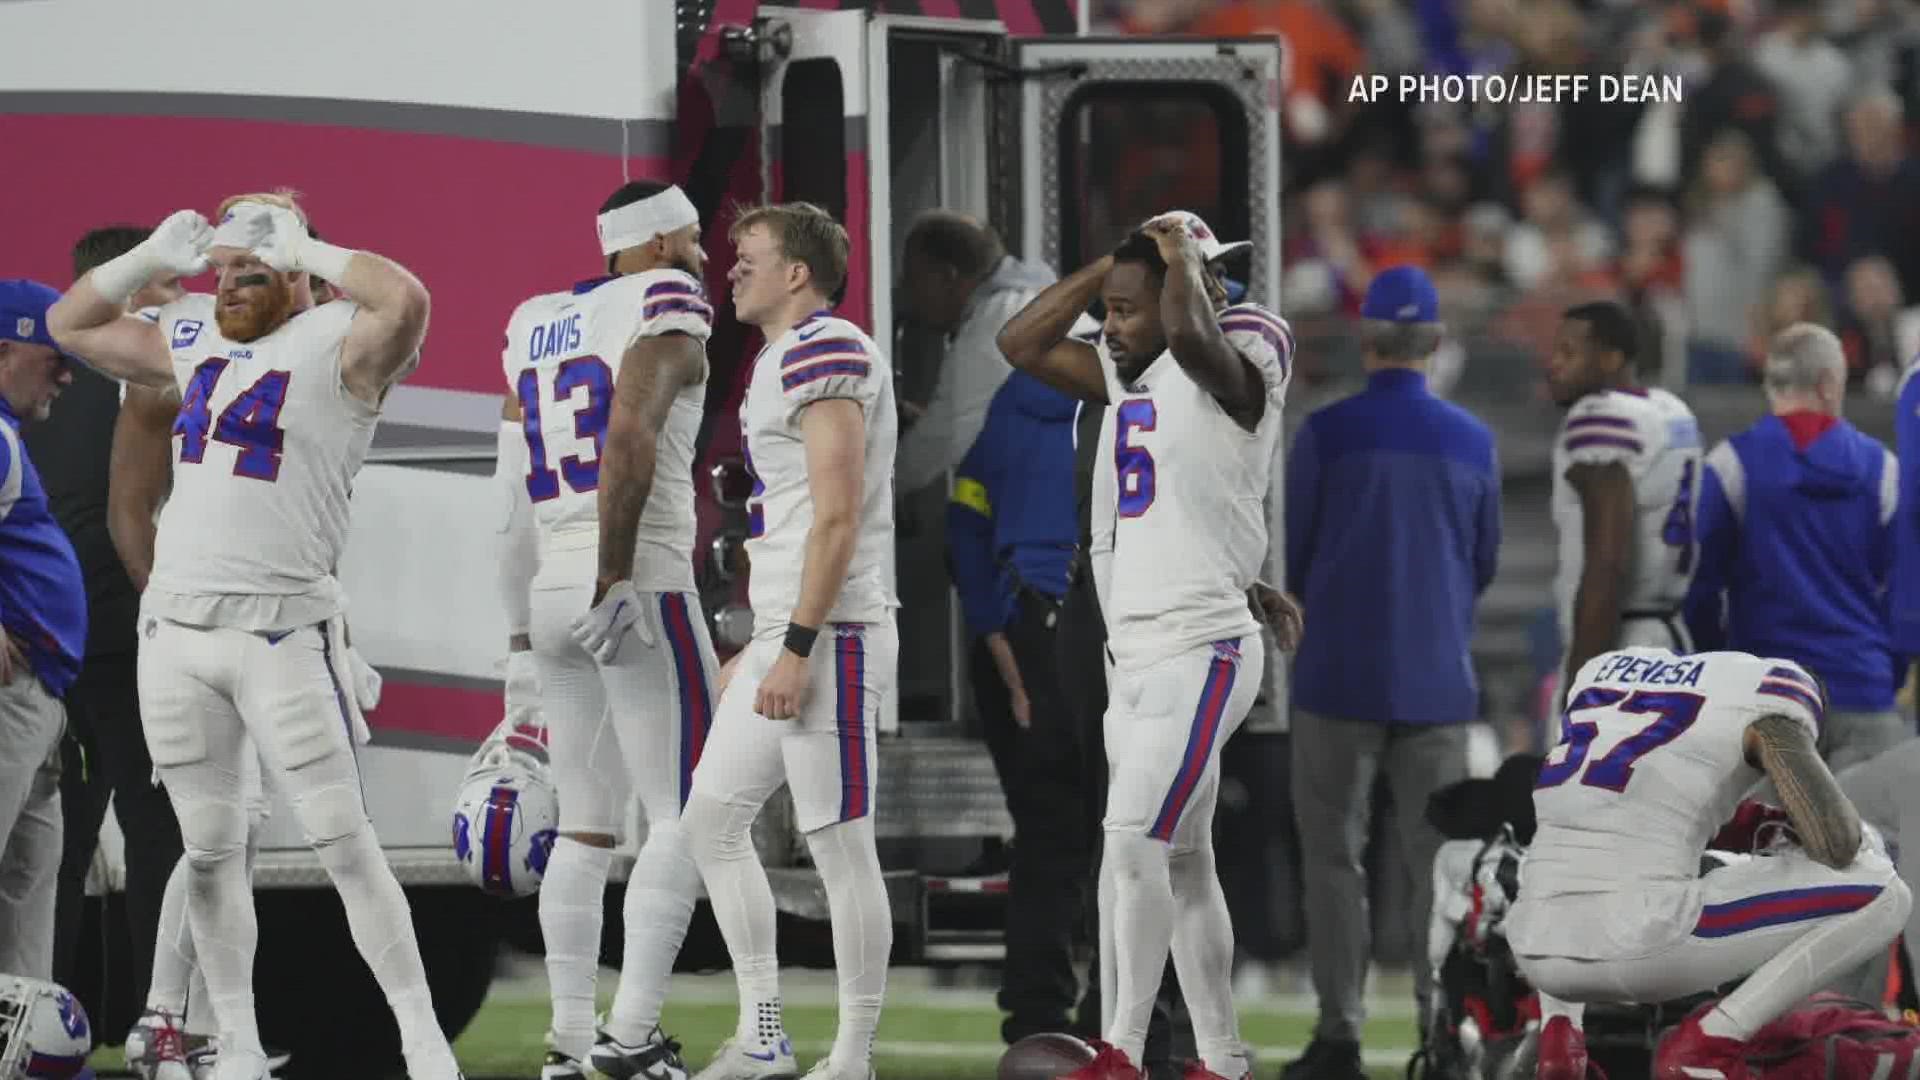 Buffalo Bills safety Damar Hamlin collided with a Bengals receiver, got to his feet and then fell backward a second or two later and lay motionless.